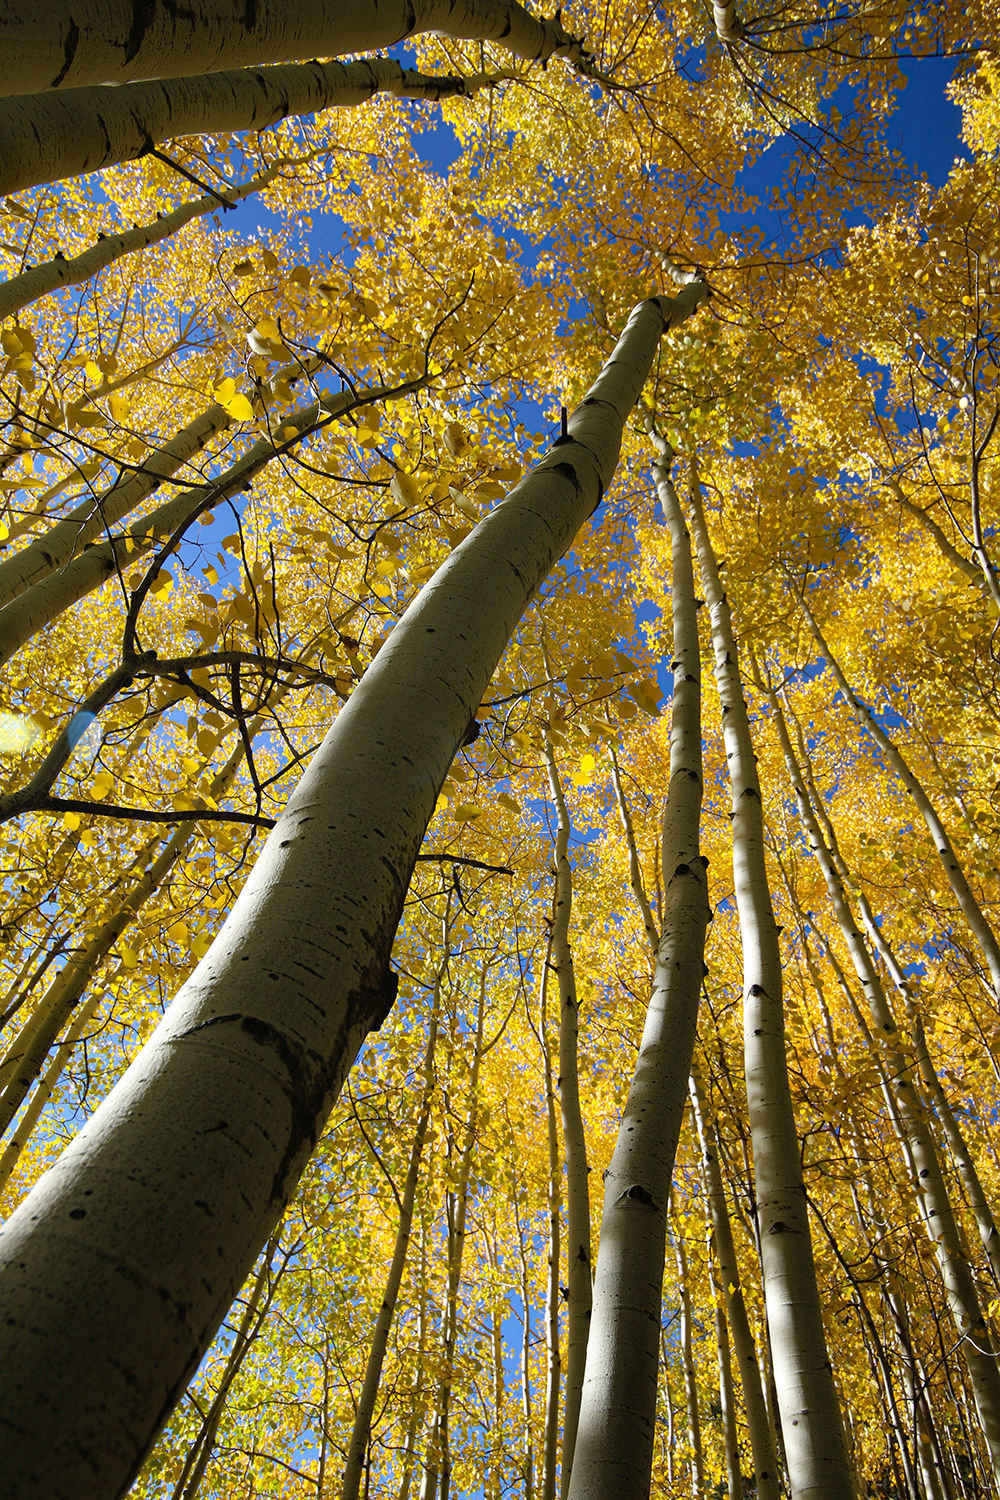 Aspen Forest in the Summer Utah Available in multiple formats.